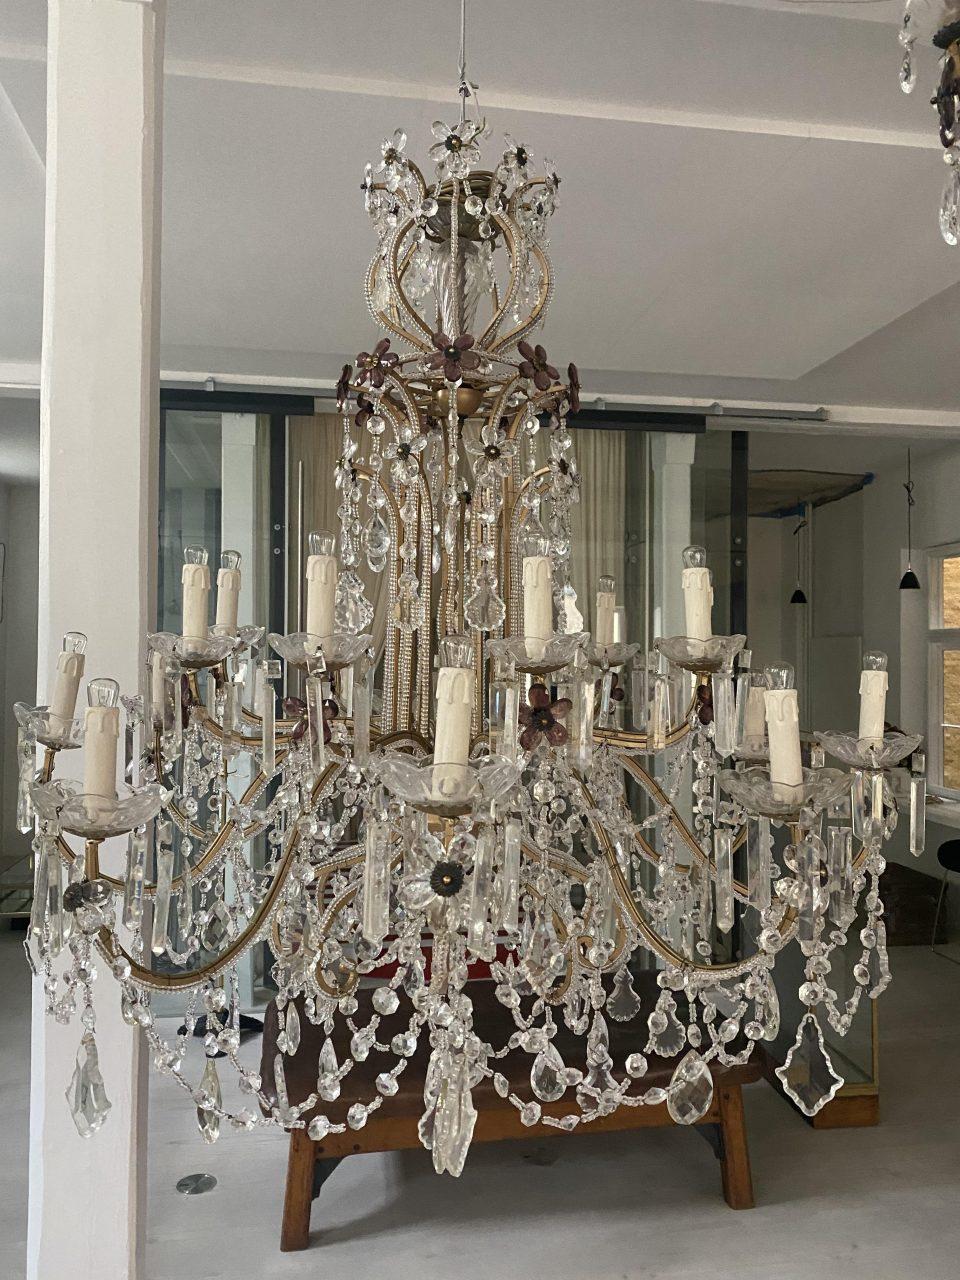 Fantastically beautiful and voluminous French prism ceiling lamp, from circa 1920s-30s. Generally seen in French chateaus and mansions, or grand hotels. The chandelier is a true opulence of clear prism branches and beautiful faceted prisms in